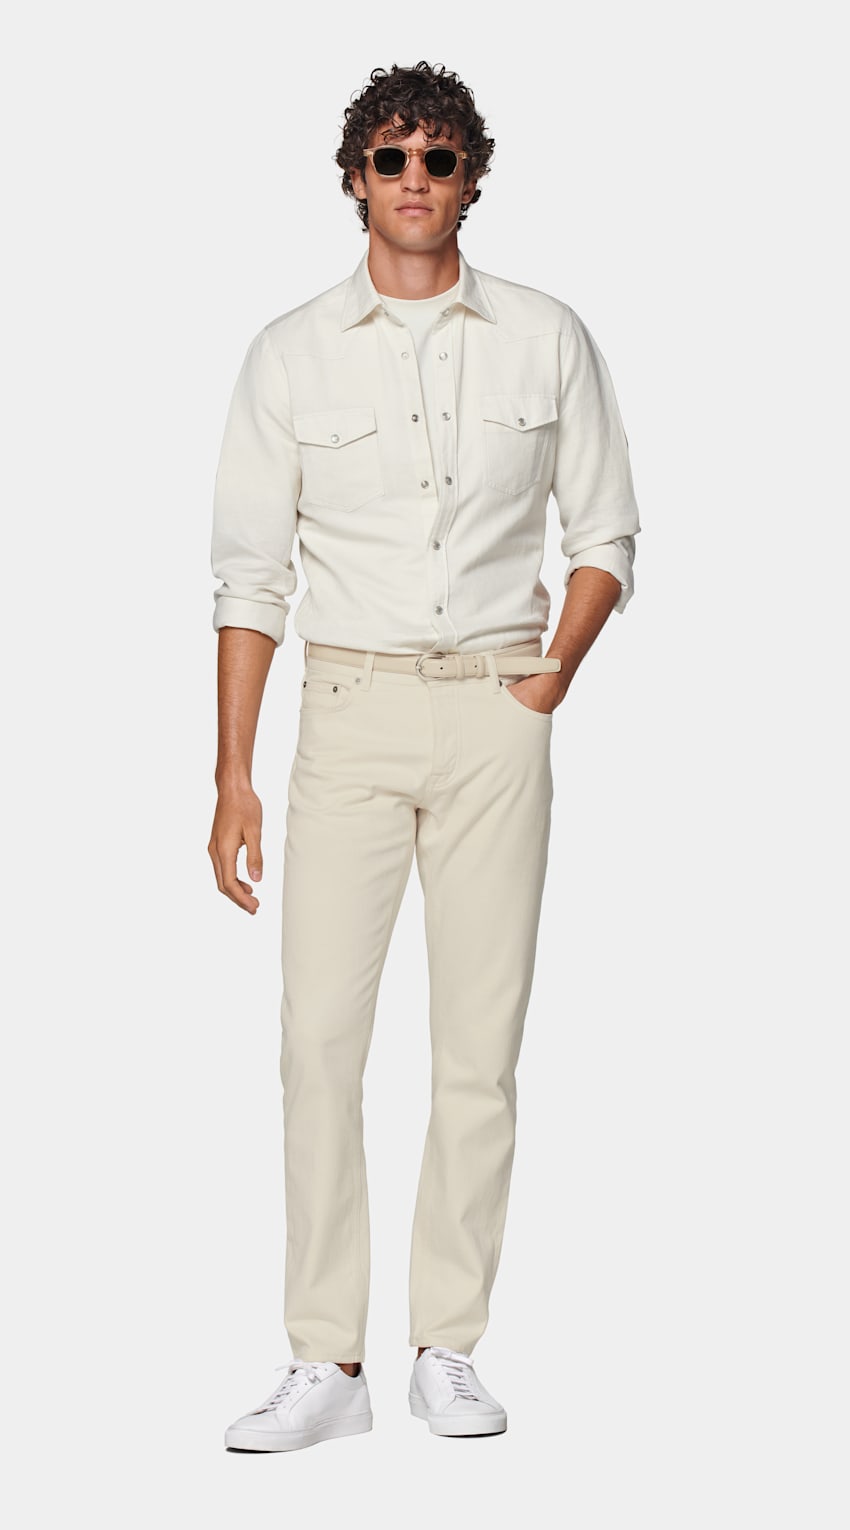 SUITSUPPLY Linen Cotton by Canclini, Italy Off-White Slim Fit Shirt